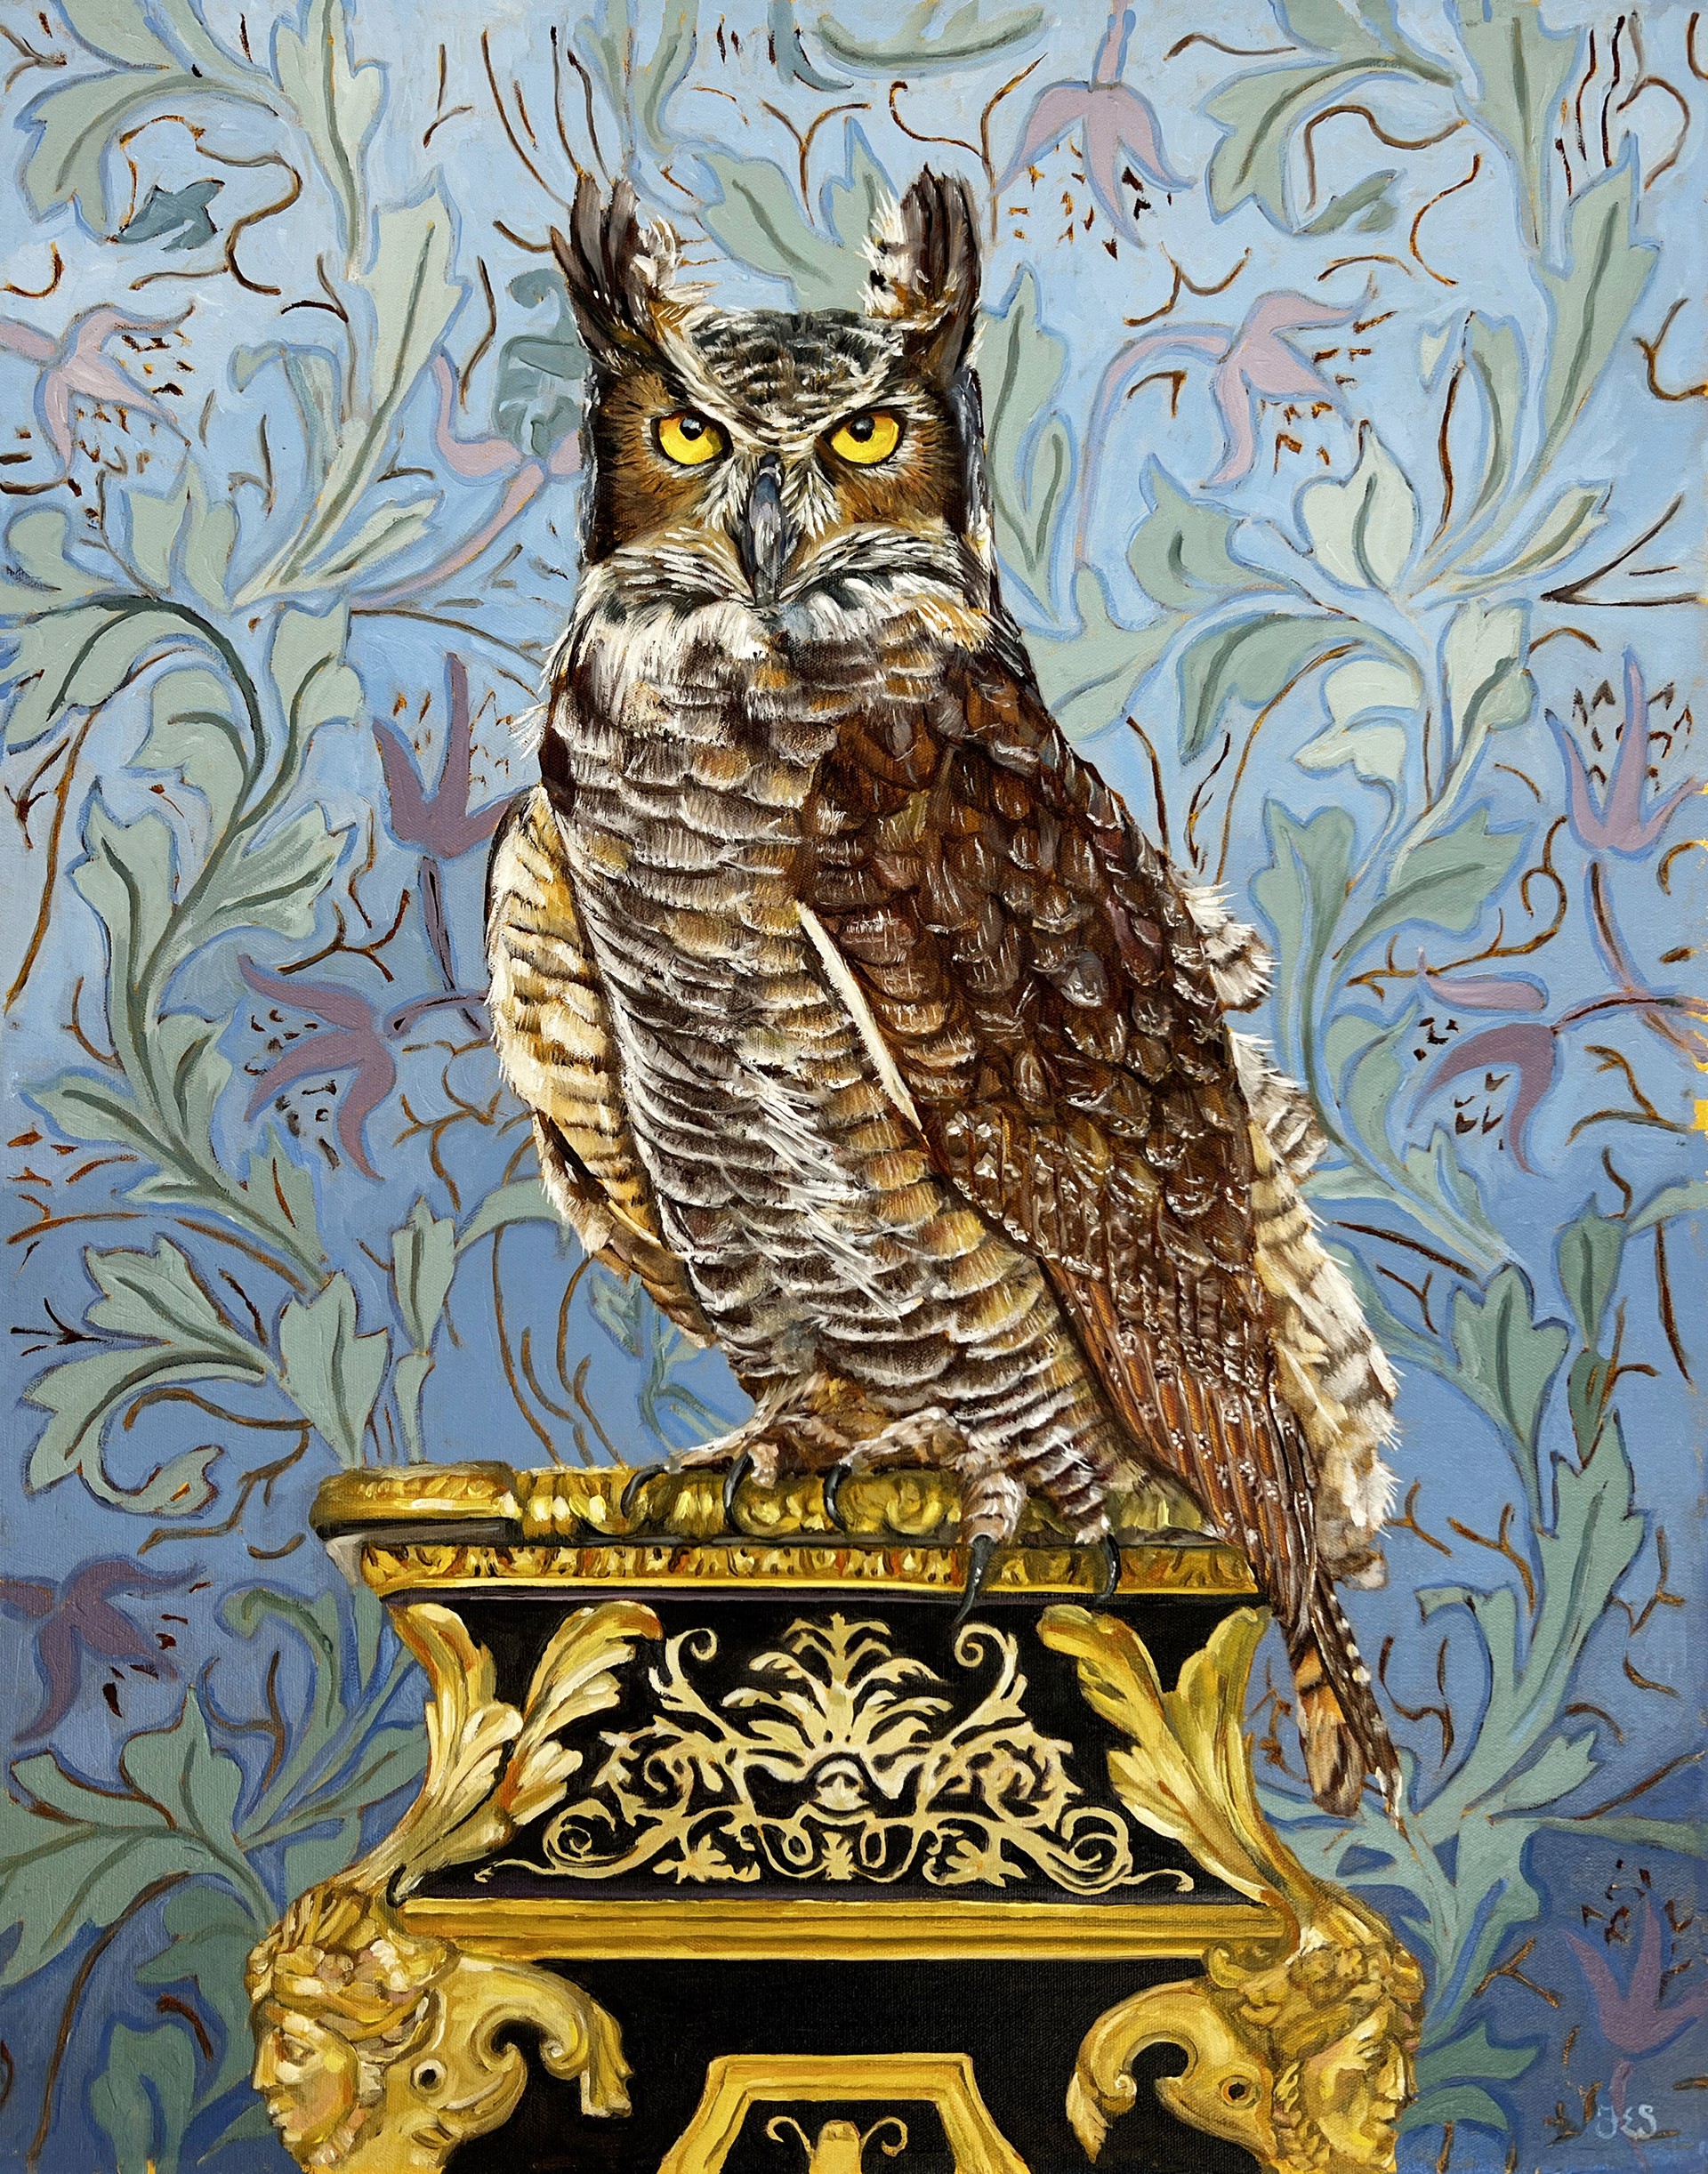 Regent, Great Horned Owl by Fiona Smith